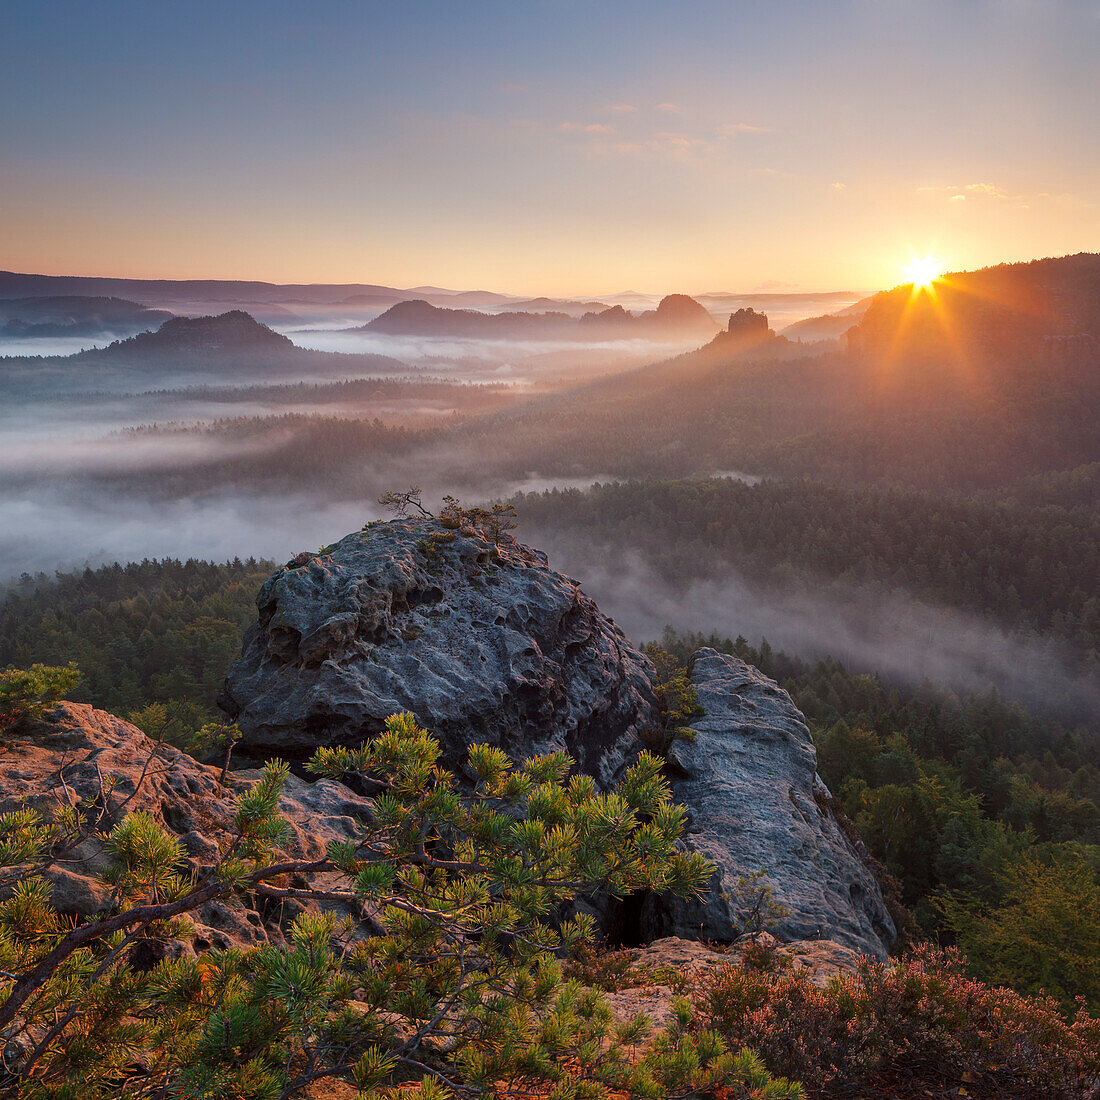 View from Gleitmannshorn over the small Zschand with fog at sunrise with rocks in foreground, Kleiner Winterberg, National Park Saxon Switzerland, Saxony, Germany